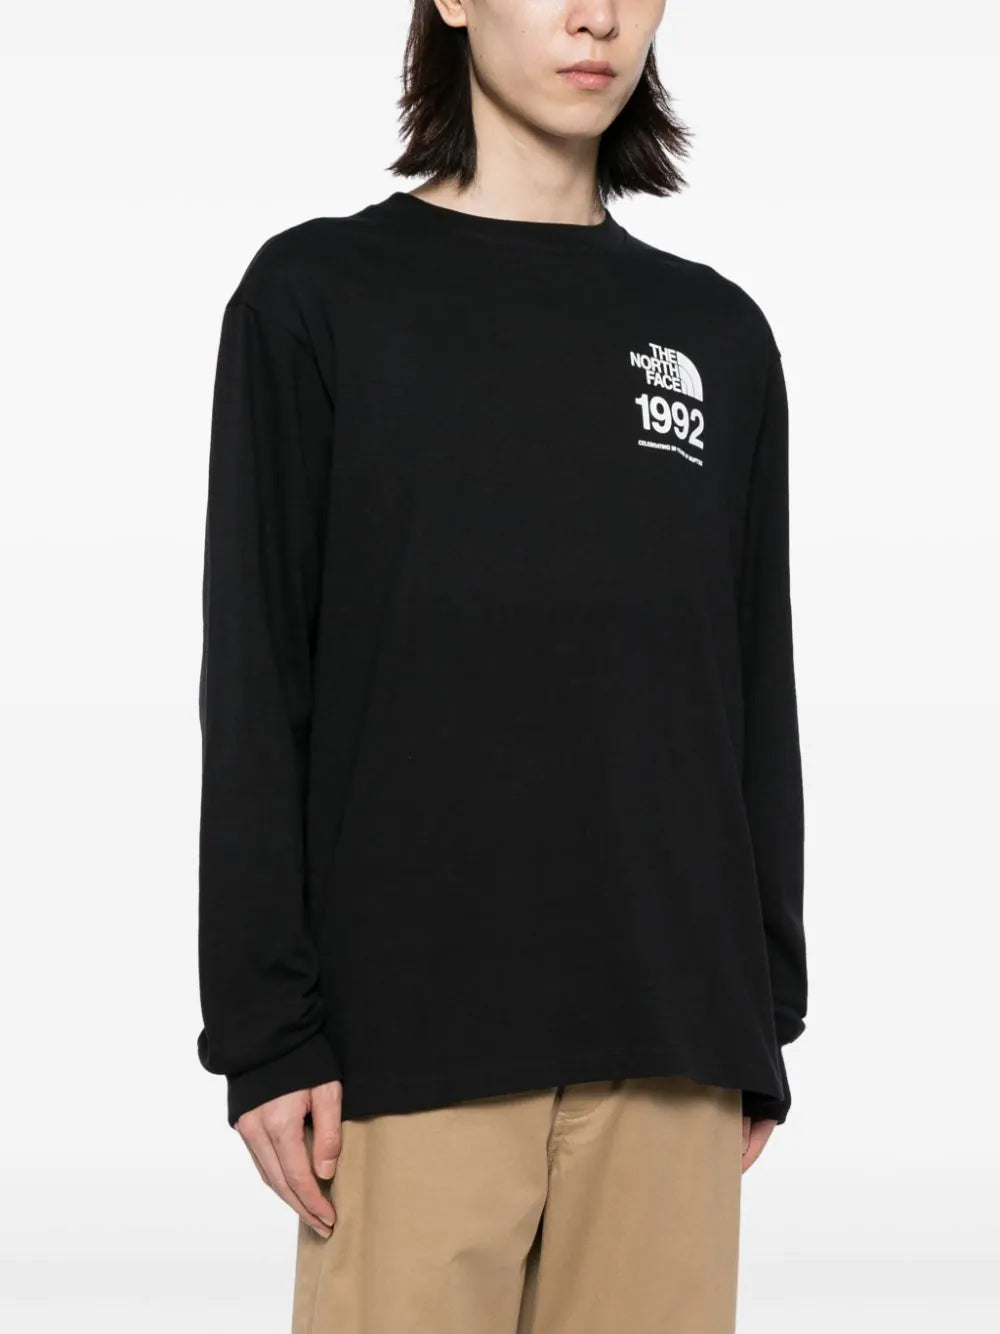 THE NORTH FACE Heavyweight Printed Tee